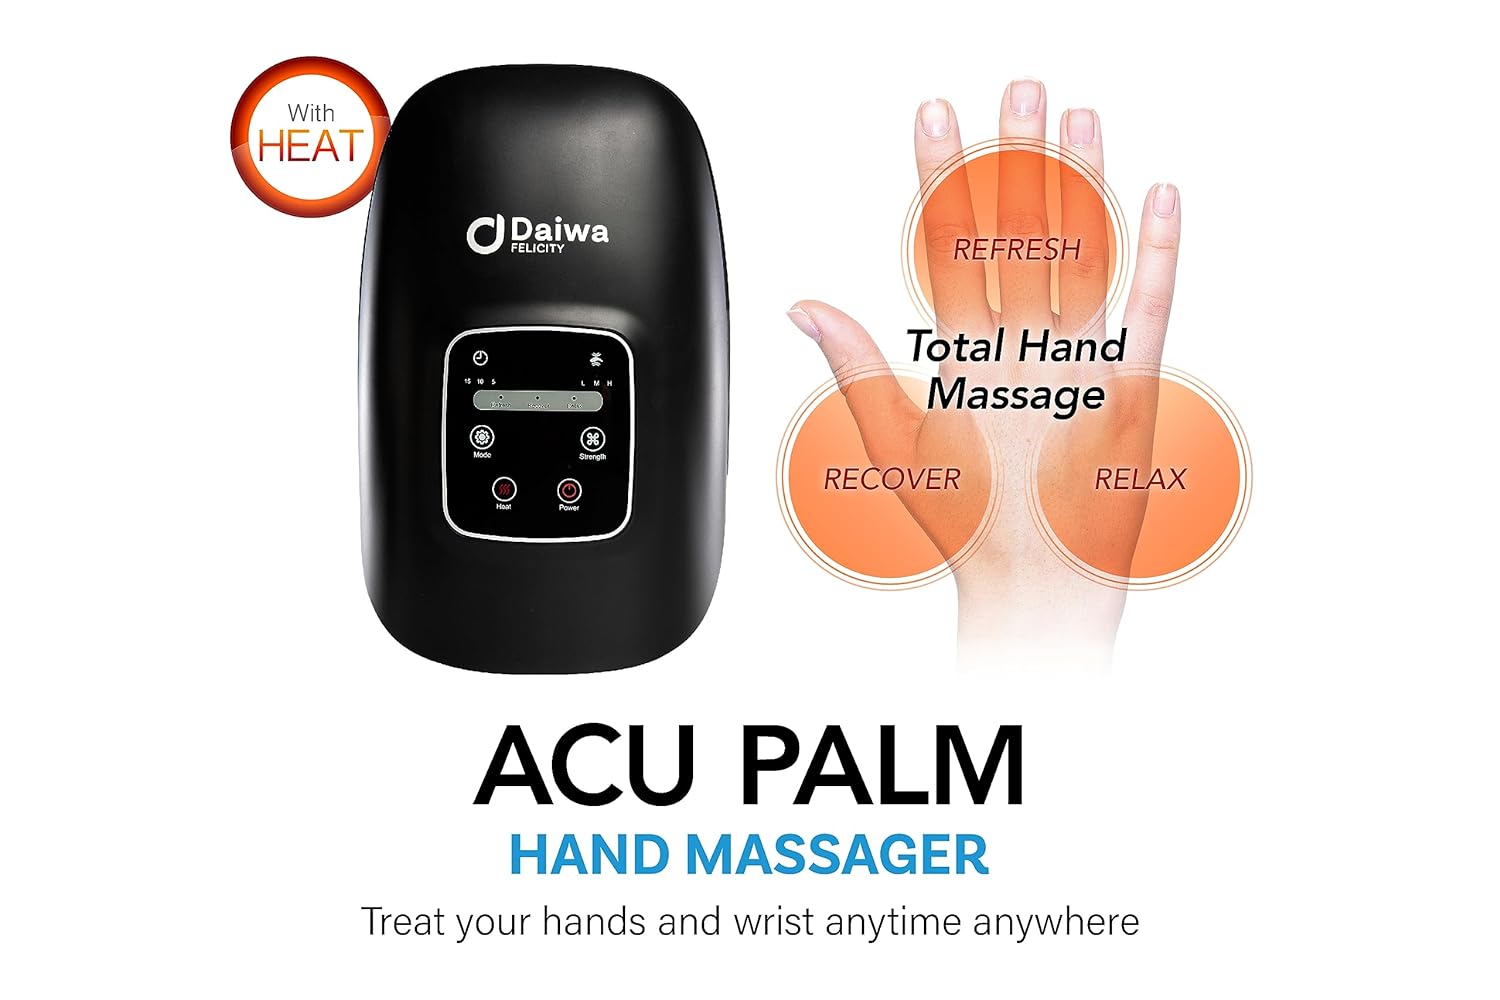 Daiwa Felicity Hand Massager Machine - FSA HSA Eligible rechargeable cordless carpal tunnel massager with 3 Auto Massage Nodes - Compression therapy assists arthritis pain relief - 15 minute off timer